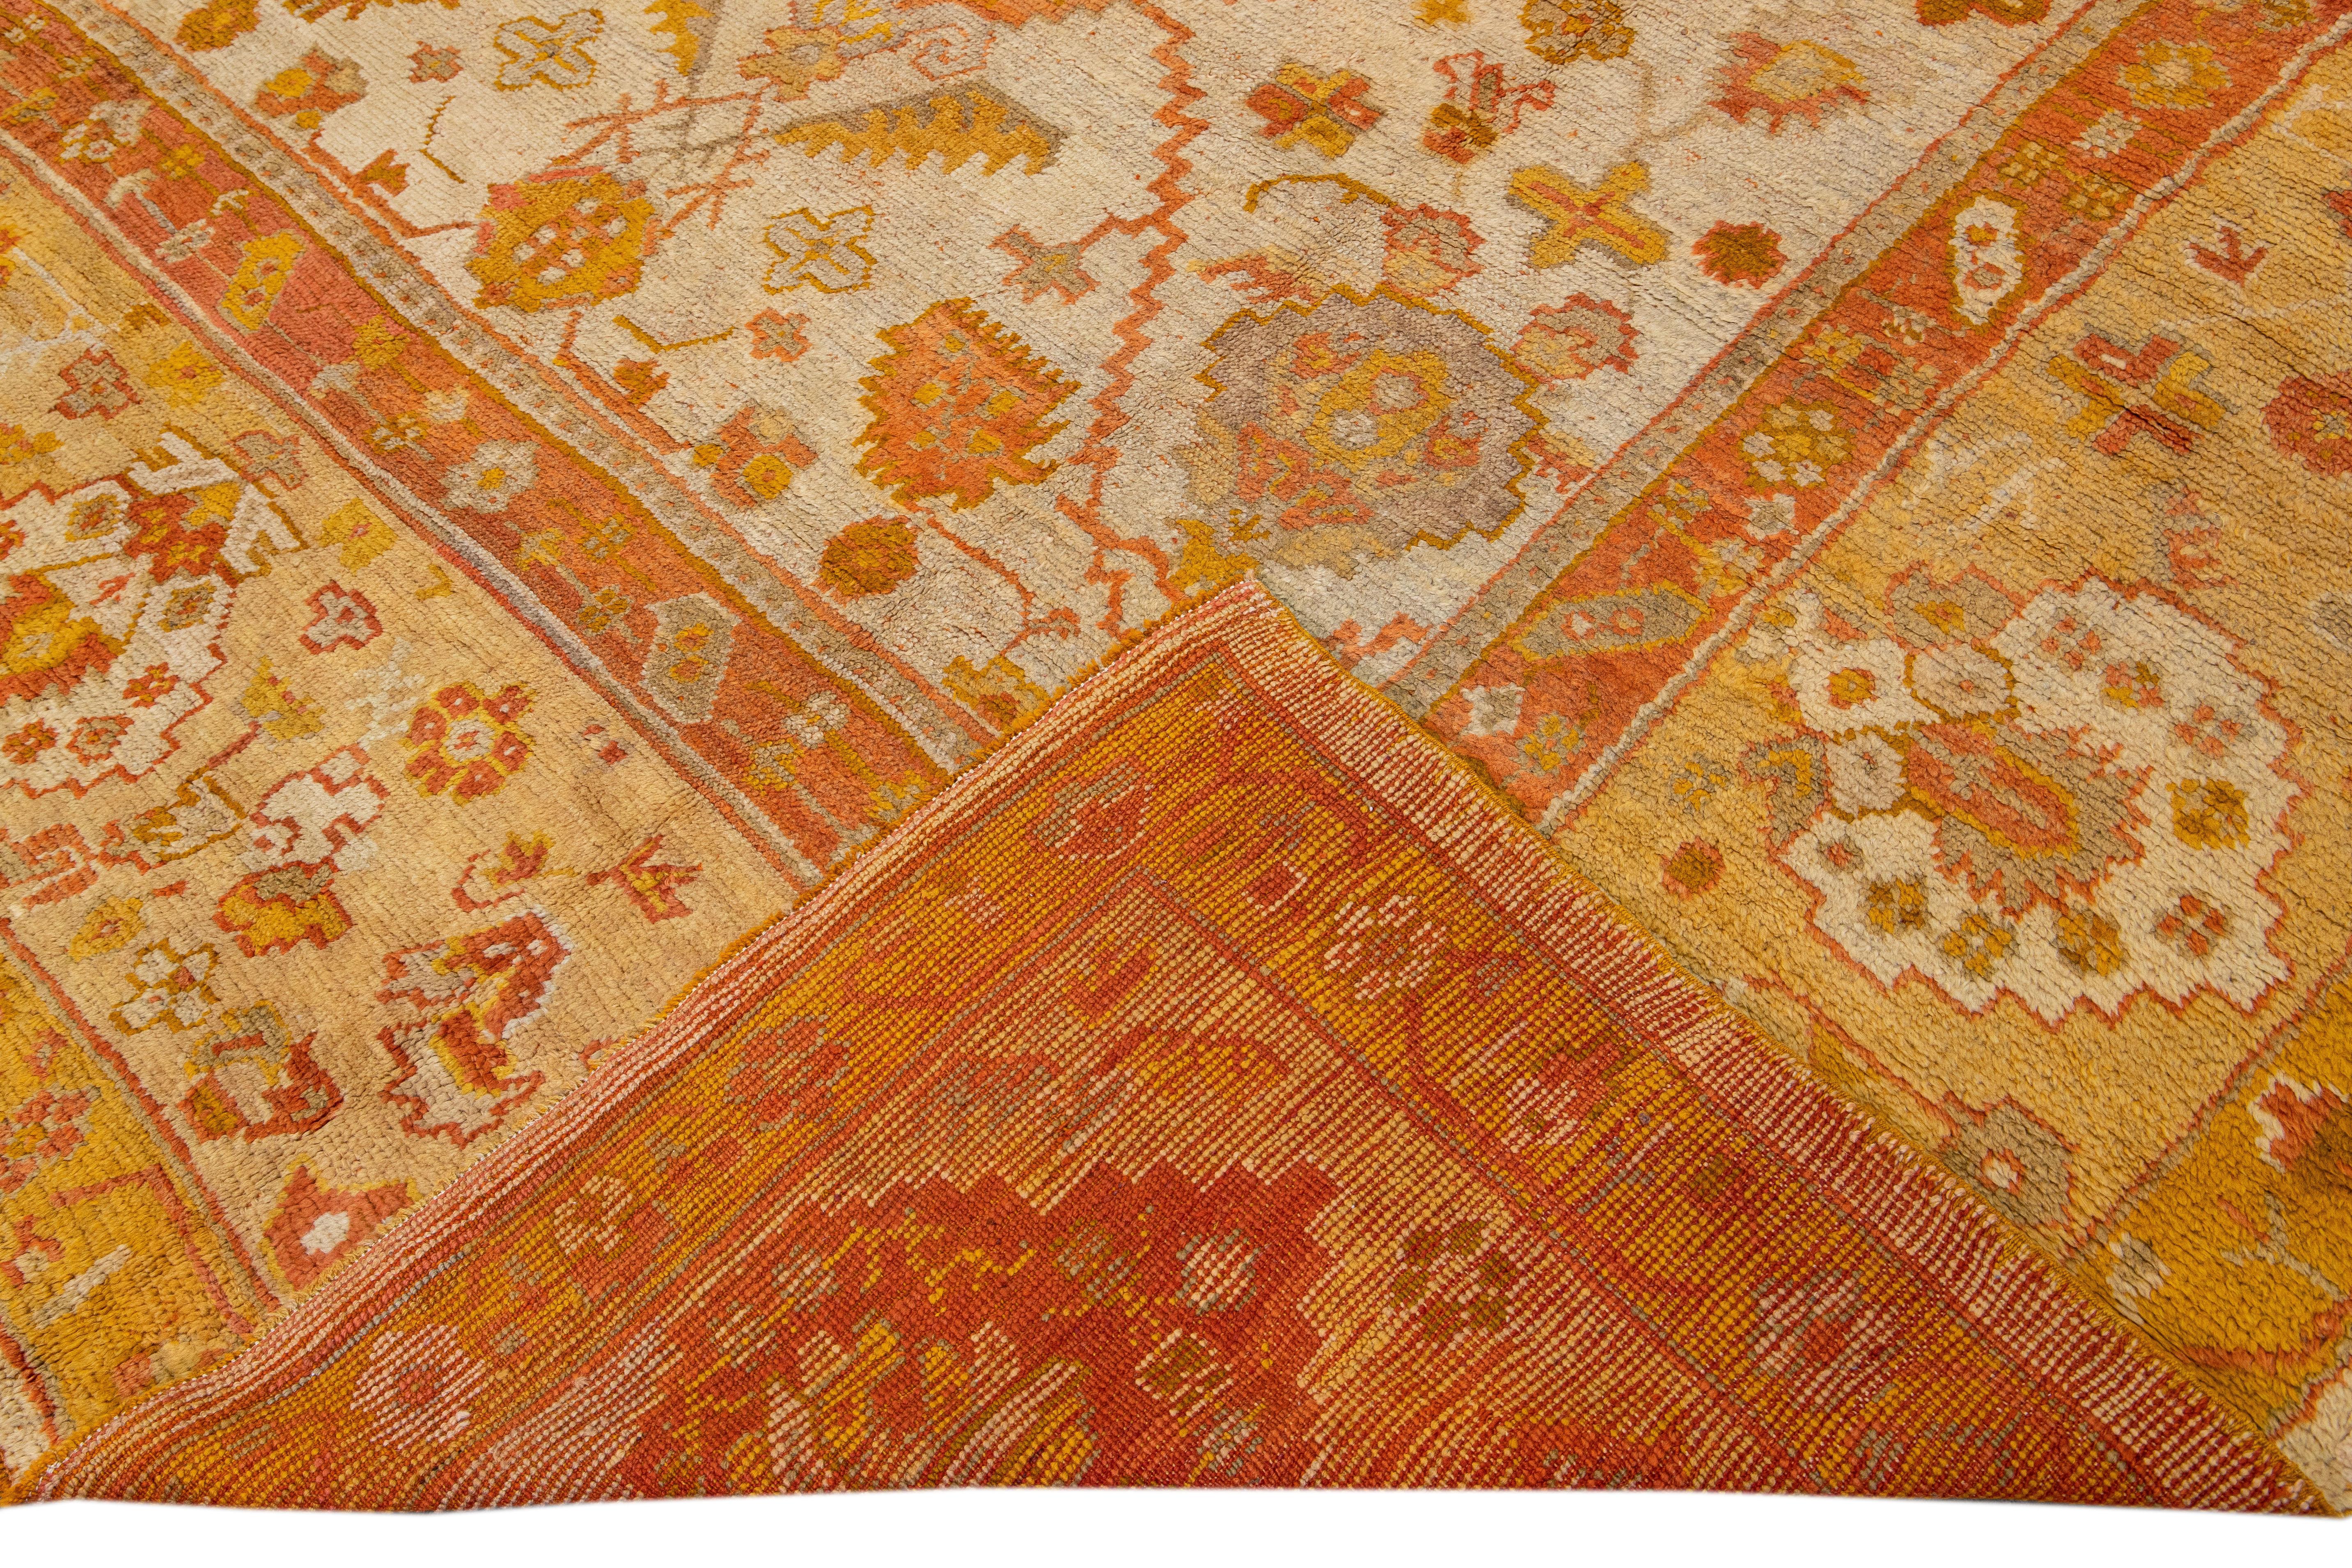 Beautiful Vintage Turkish hand-knotted wool rug with a beige field. This rug has a designed goldenrod frame with accents of orange and gray in a gorgeous all-over floral design.

This rug measures: 11'9